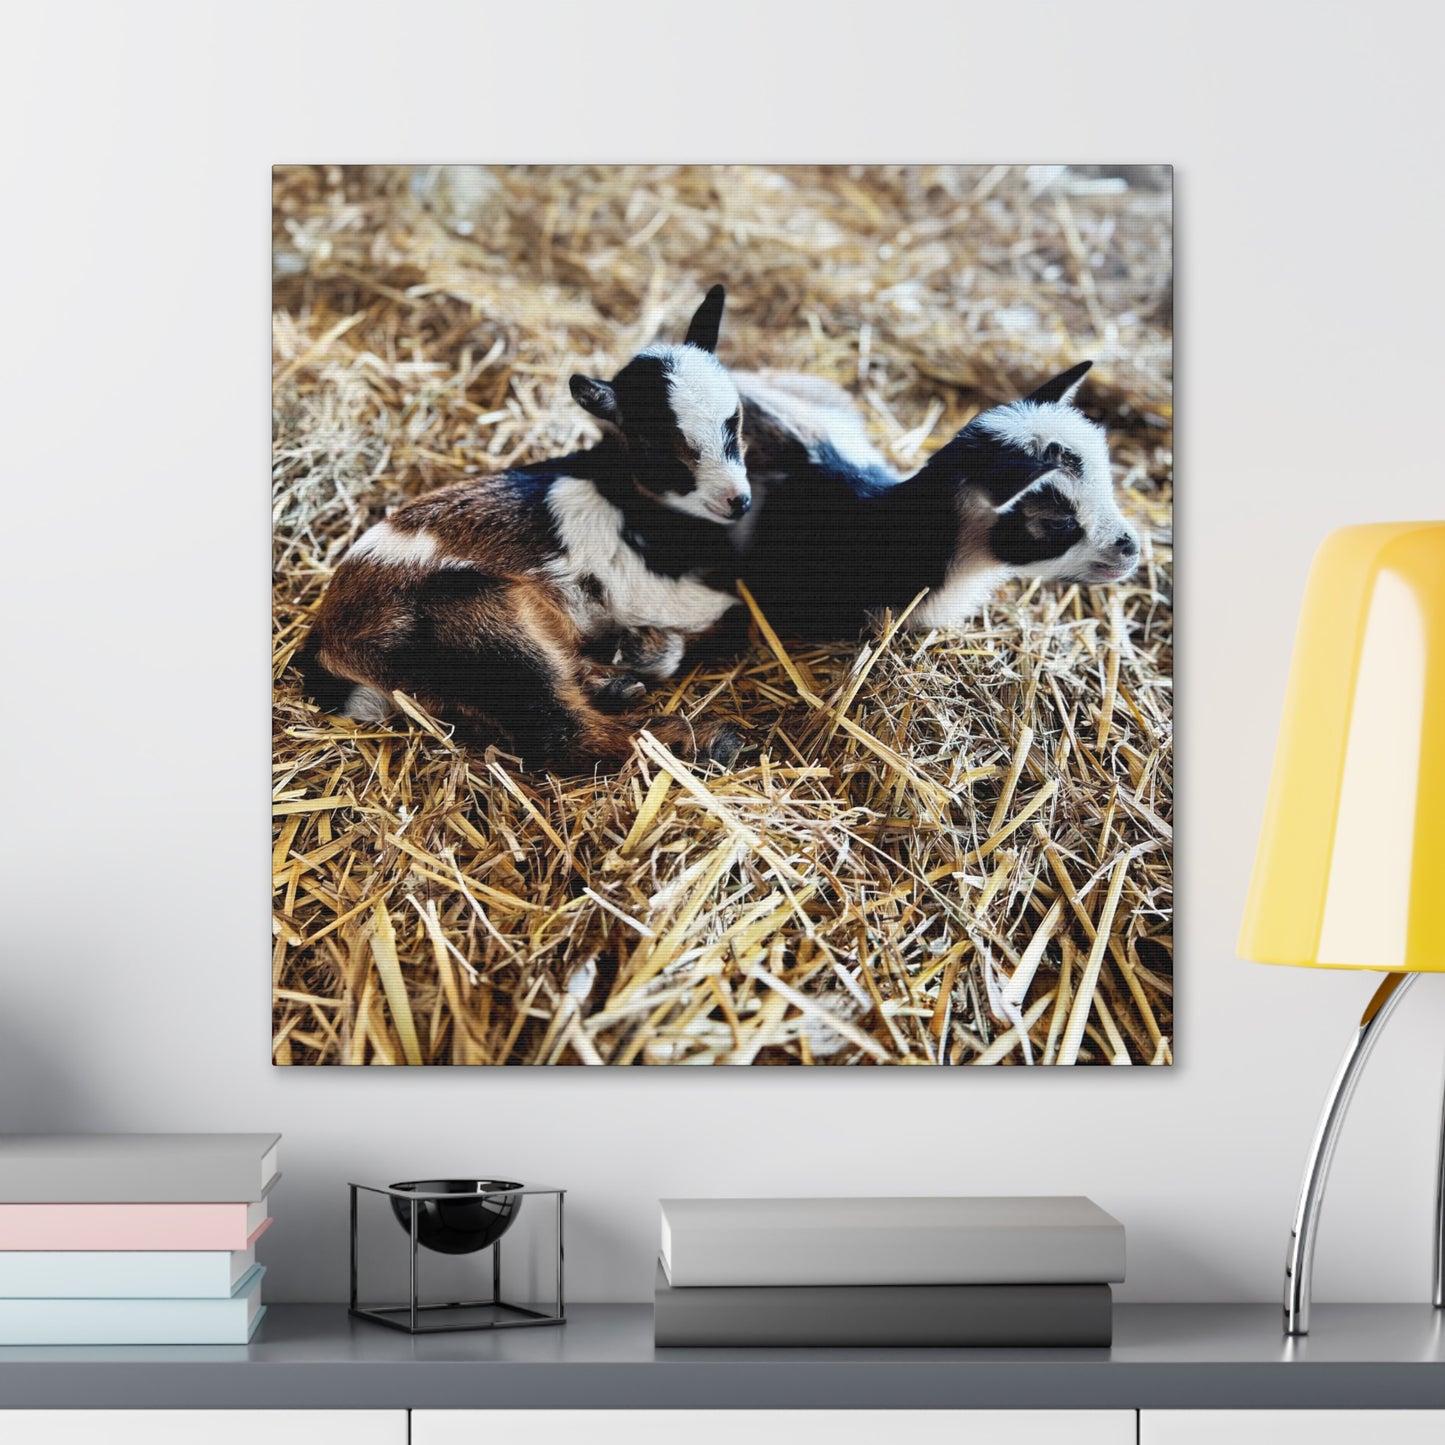 Goats - Gallery Canvas